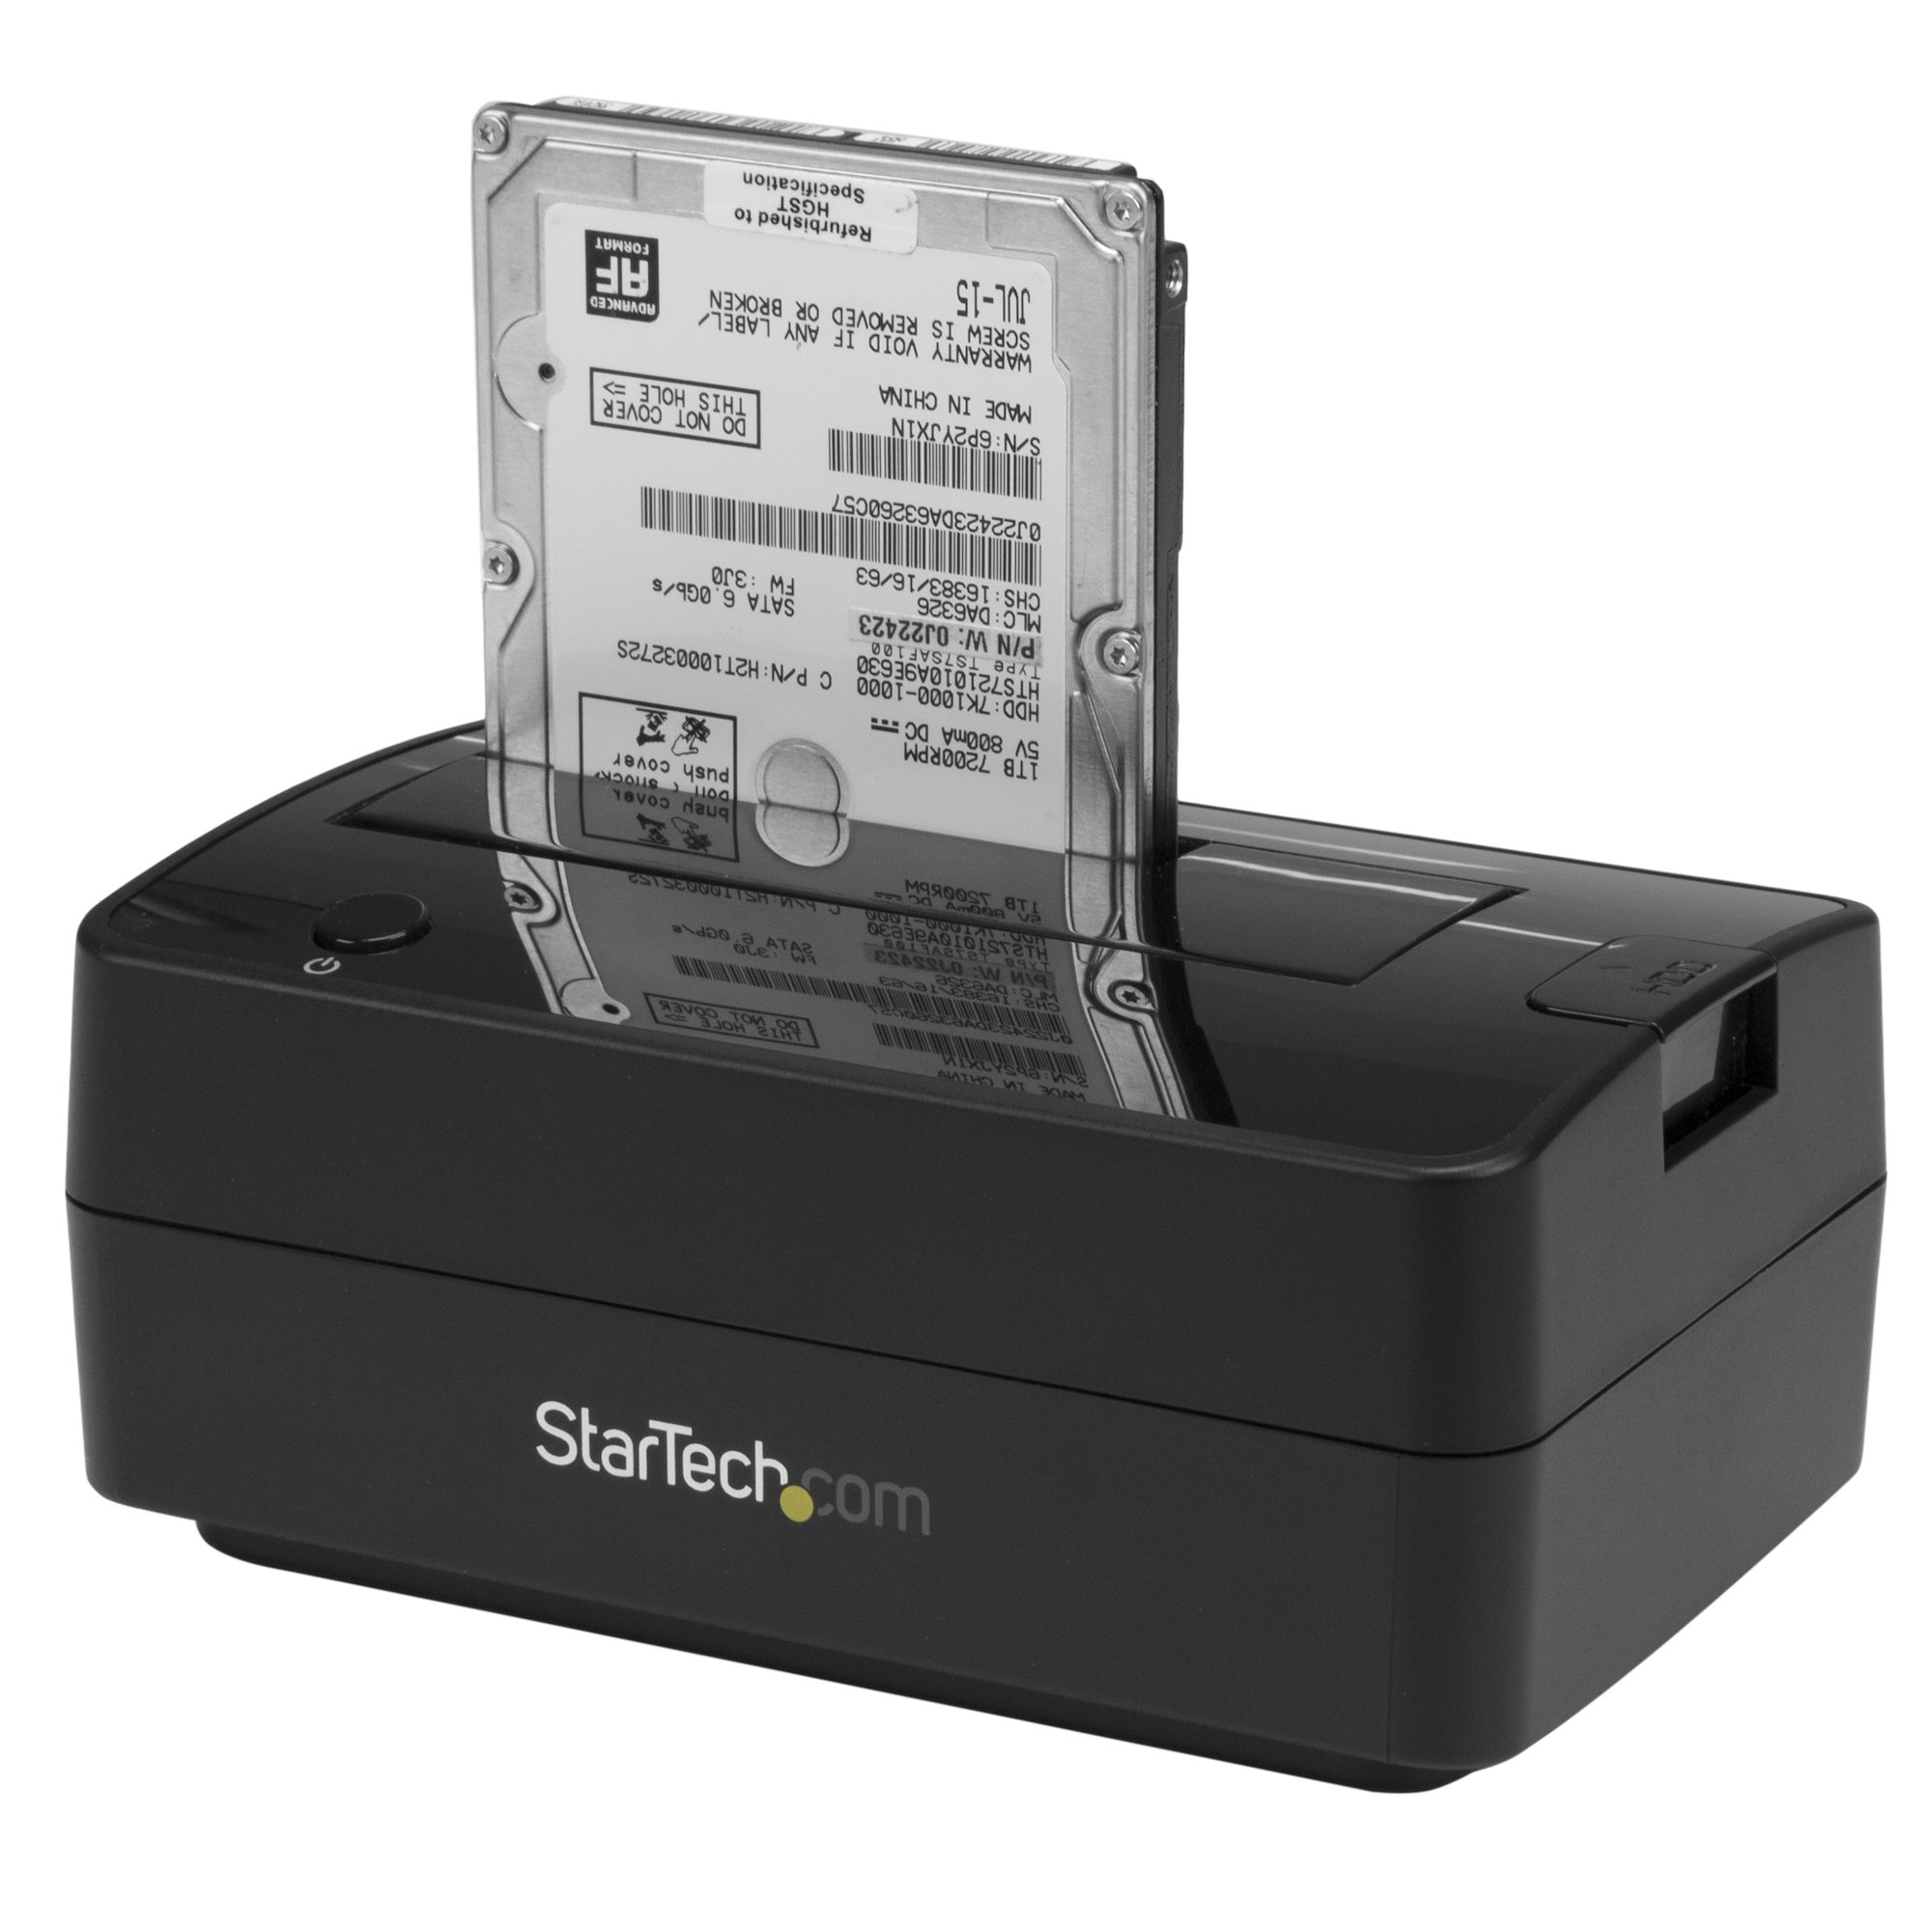 External Docking Station for 2.5in or 3.5in SATA III 6Gbps Hard Drives -  eSATA or USB 3.0 with UASP